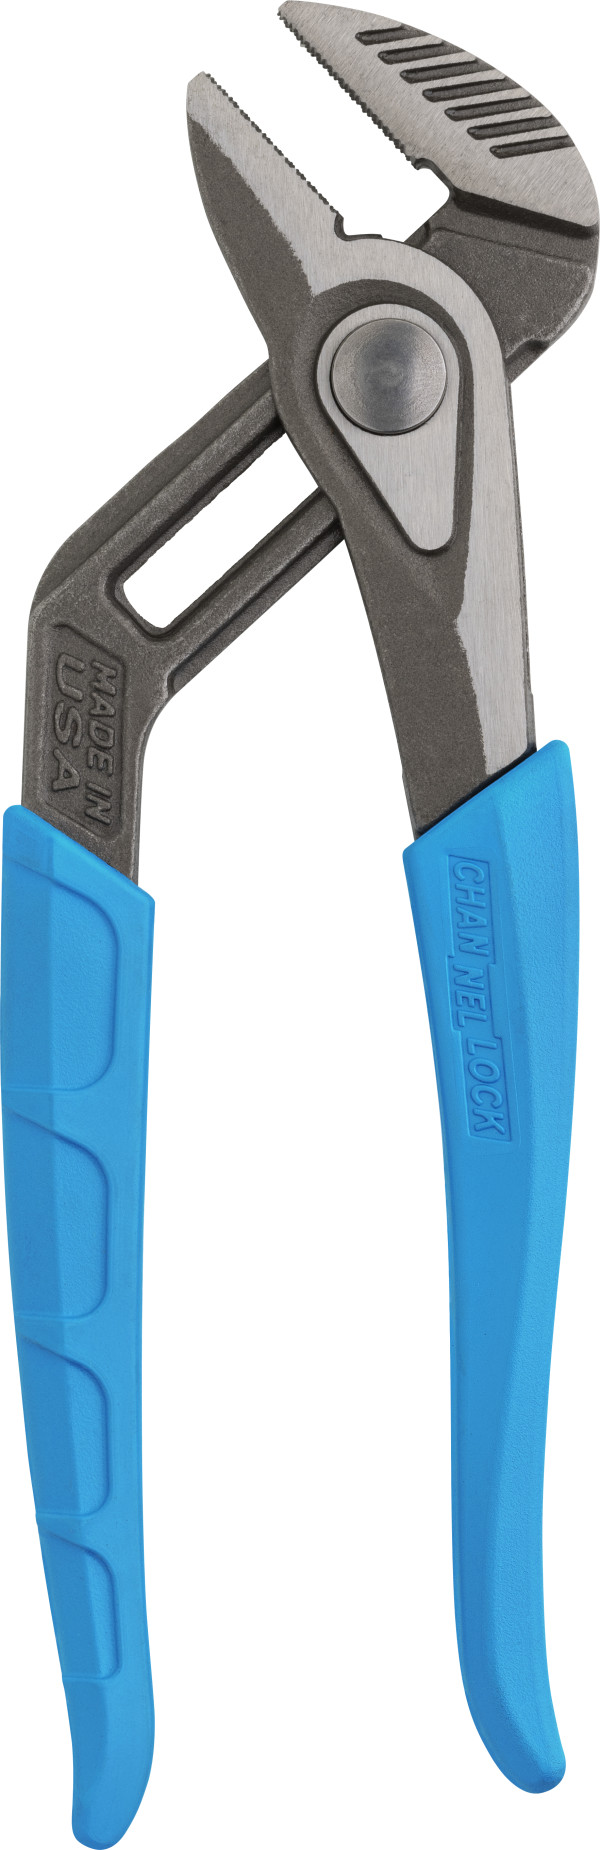 430®X 10-inch SPEEDGRIP Straight Jaw Tongue & Groove Pliers